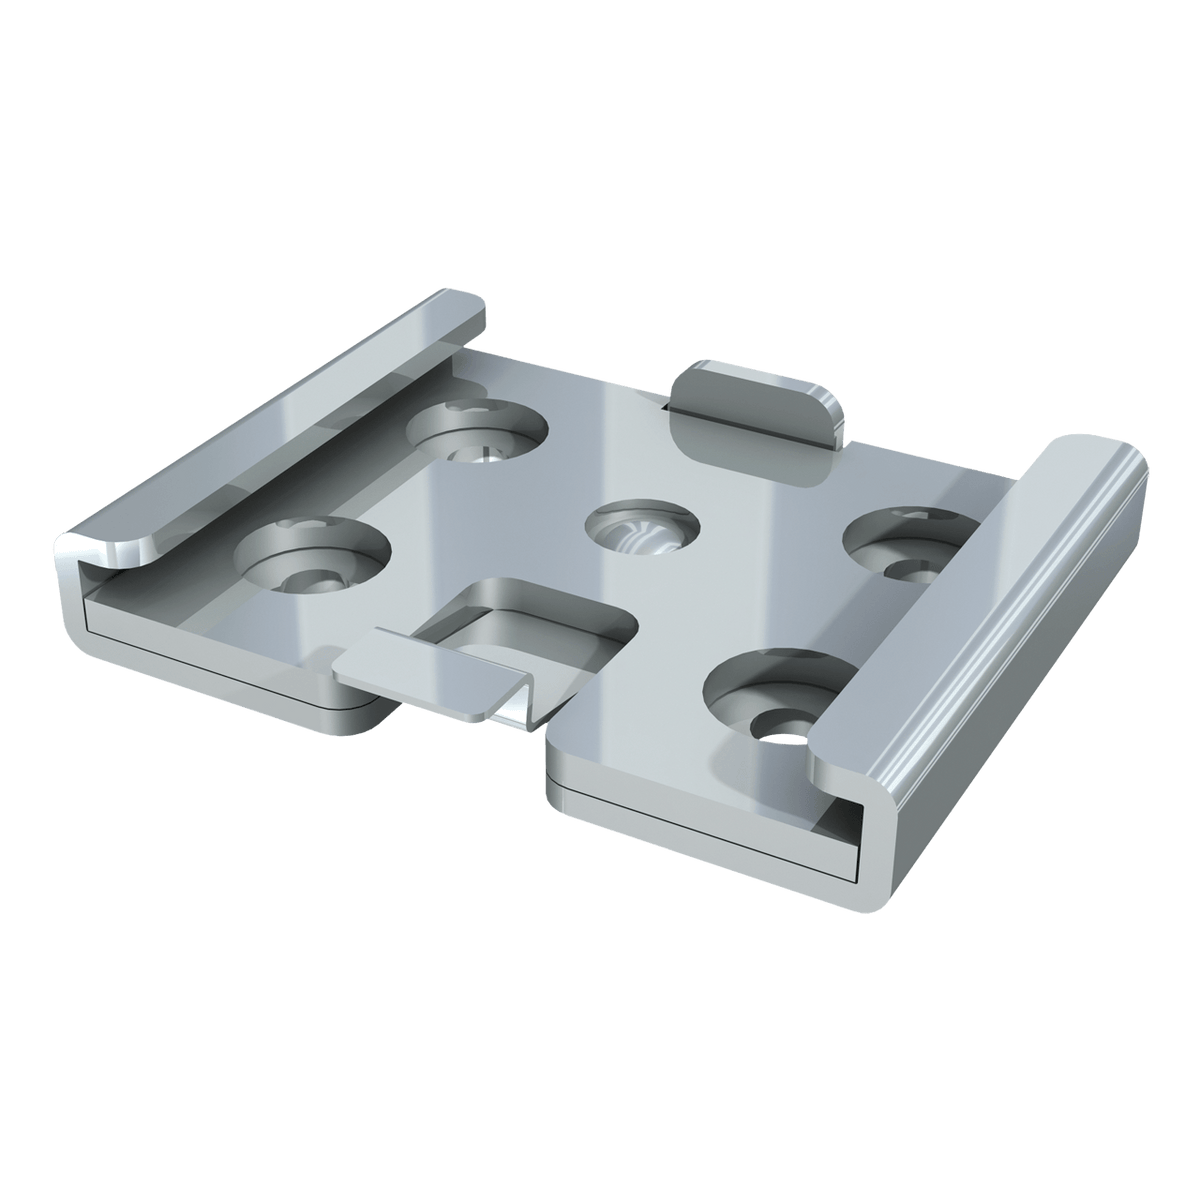 Small Quick Release Caster plate